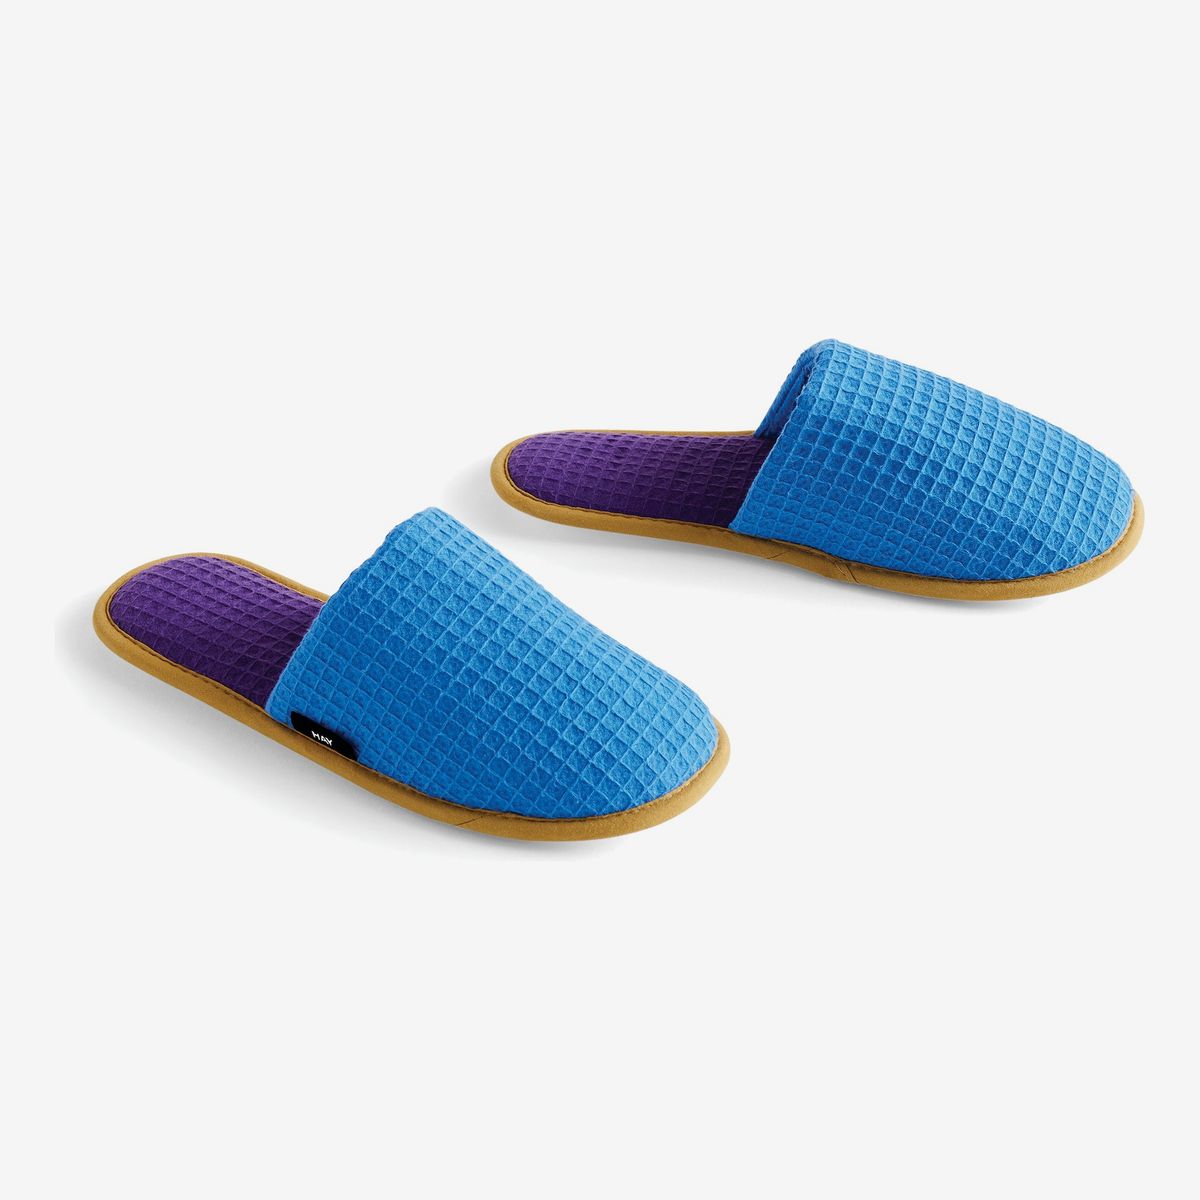 19 Women's Slippers | The